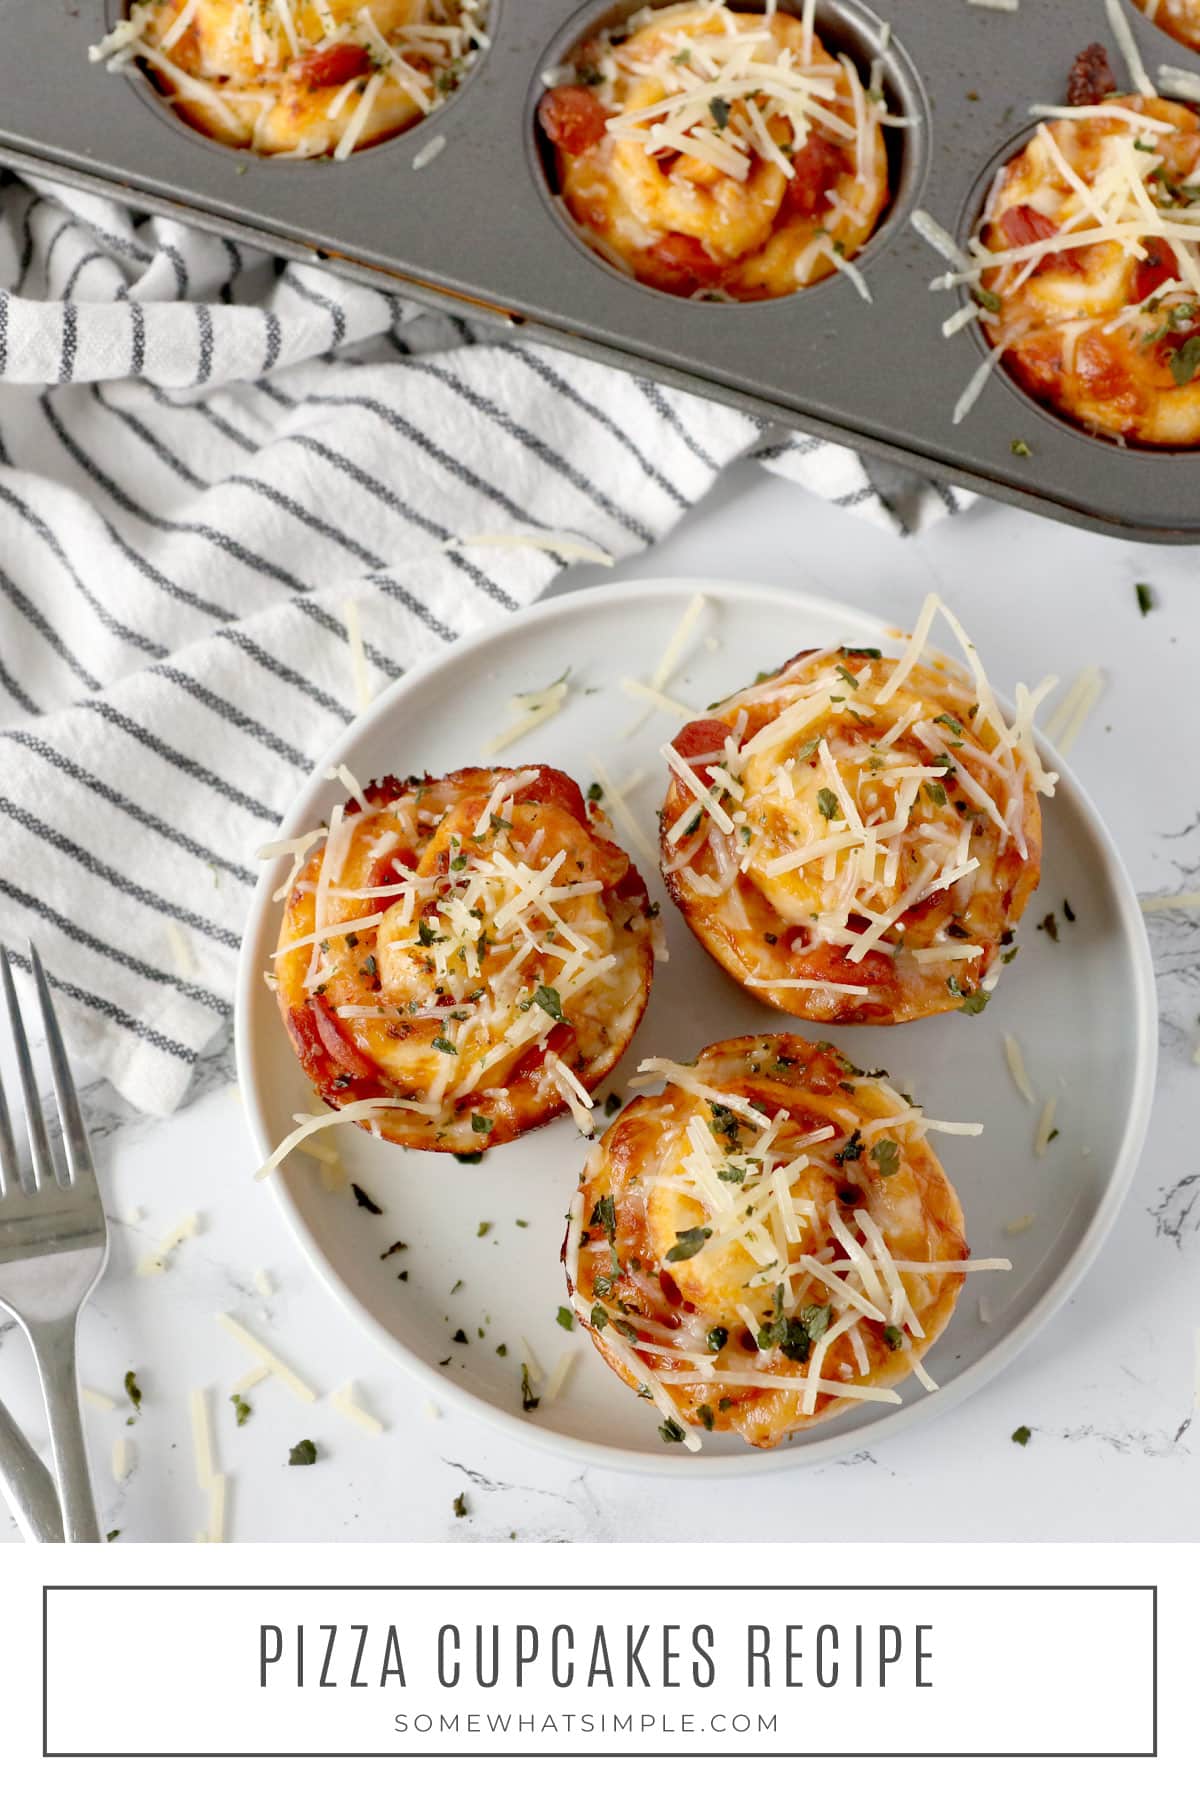 Pizza Cupcakes are a delicious option for your homemade pizza night. They're easy to customize and can be on the table in 30 minutes or less! via @somewhatsimple